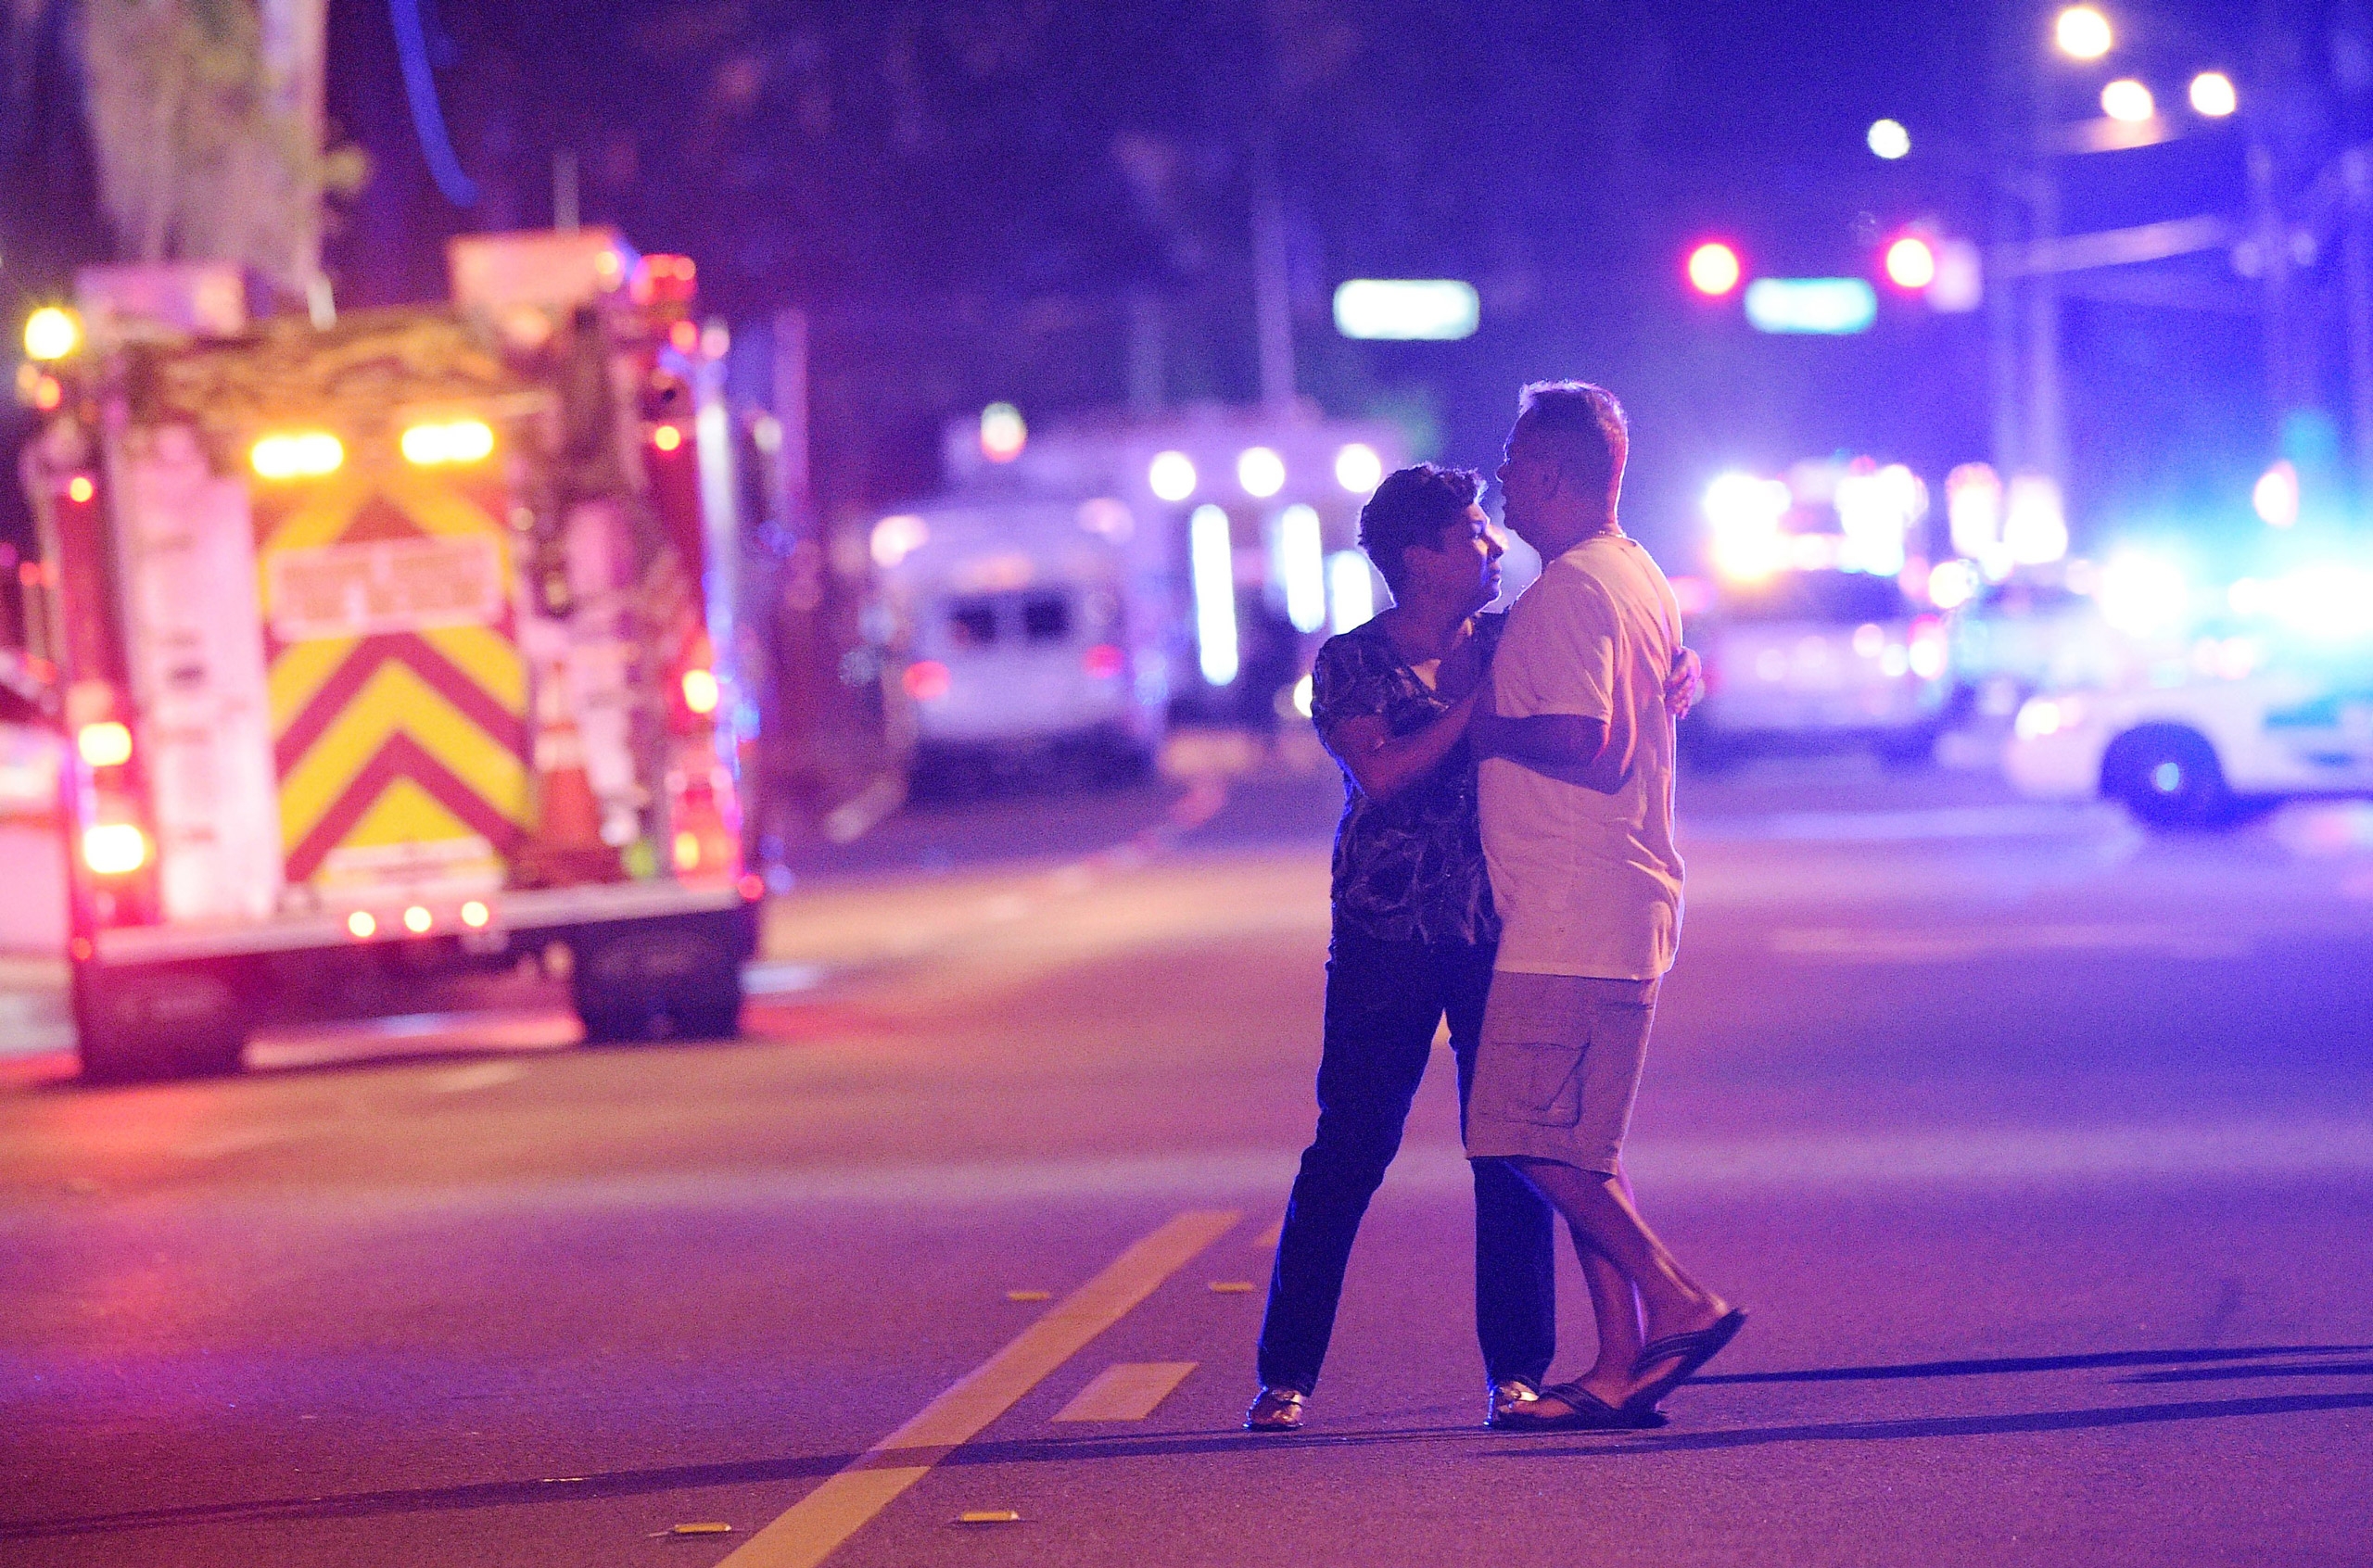 Family members wait for word from police after arriving down the street from a shooting involving multiple fatalities at Pulse Orlando nightclub in Orlando, Fla., Sunday, June 12, 2016. (AP Photo/Phelan M. Ebenhack) (Phelan M. Ebenhack&mdash;AP)